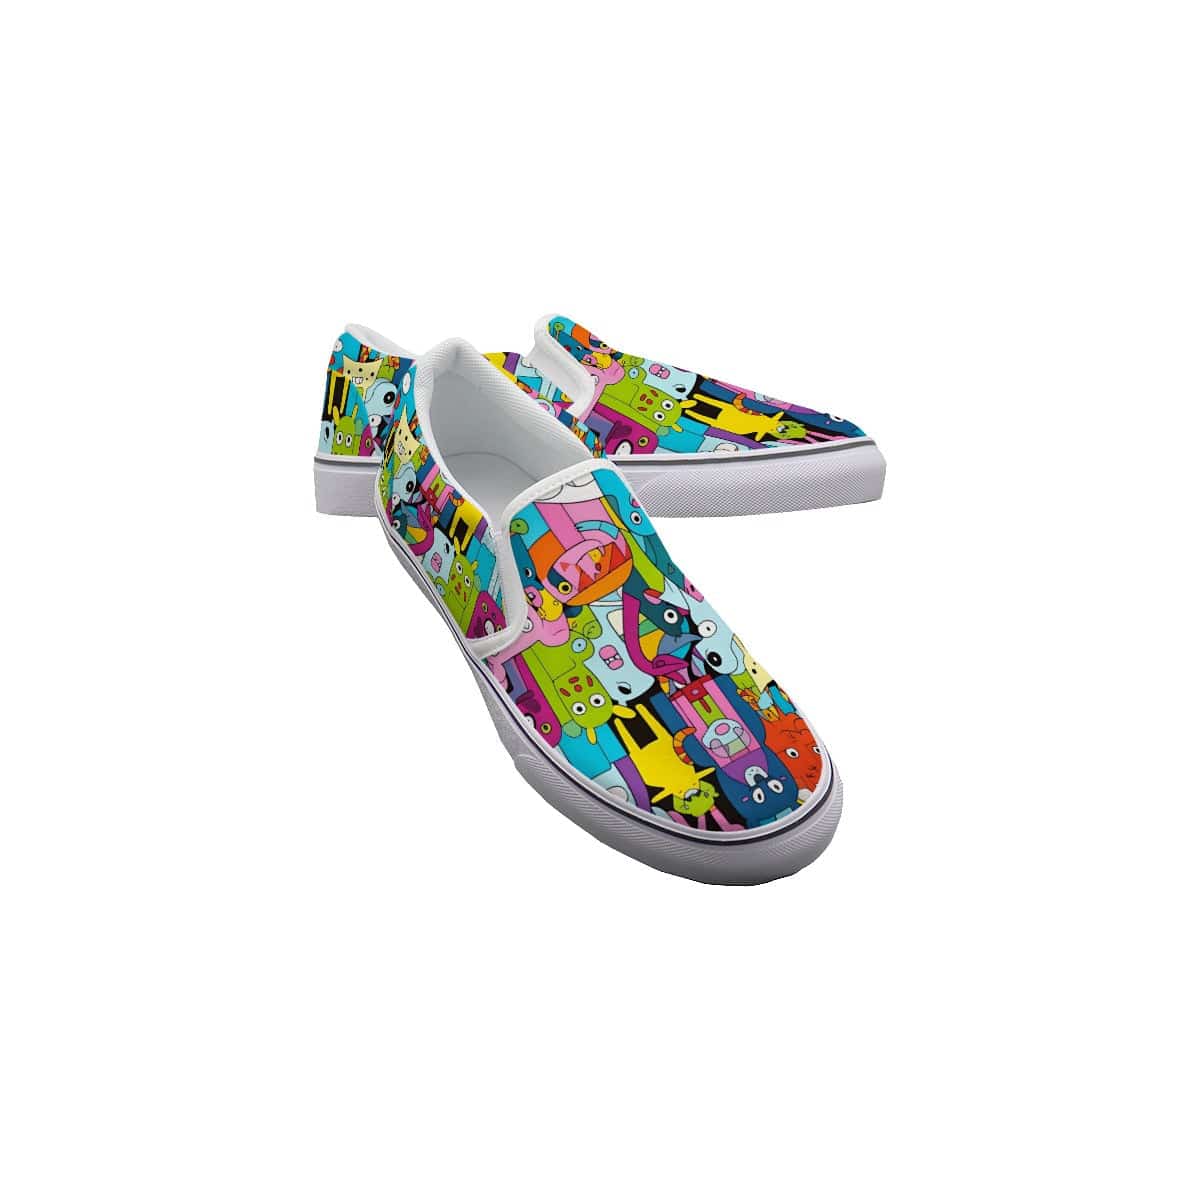 Yoycol White / US6(EUR36) Playful Pals - Women's Slip On Sneakers